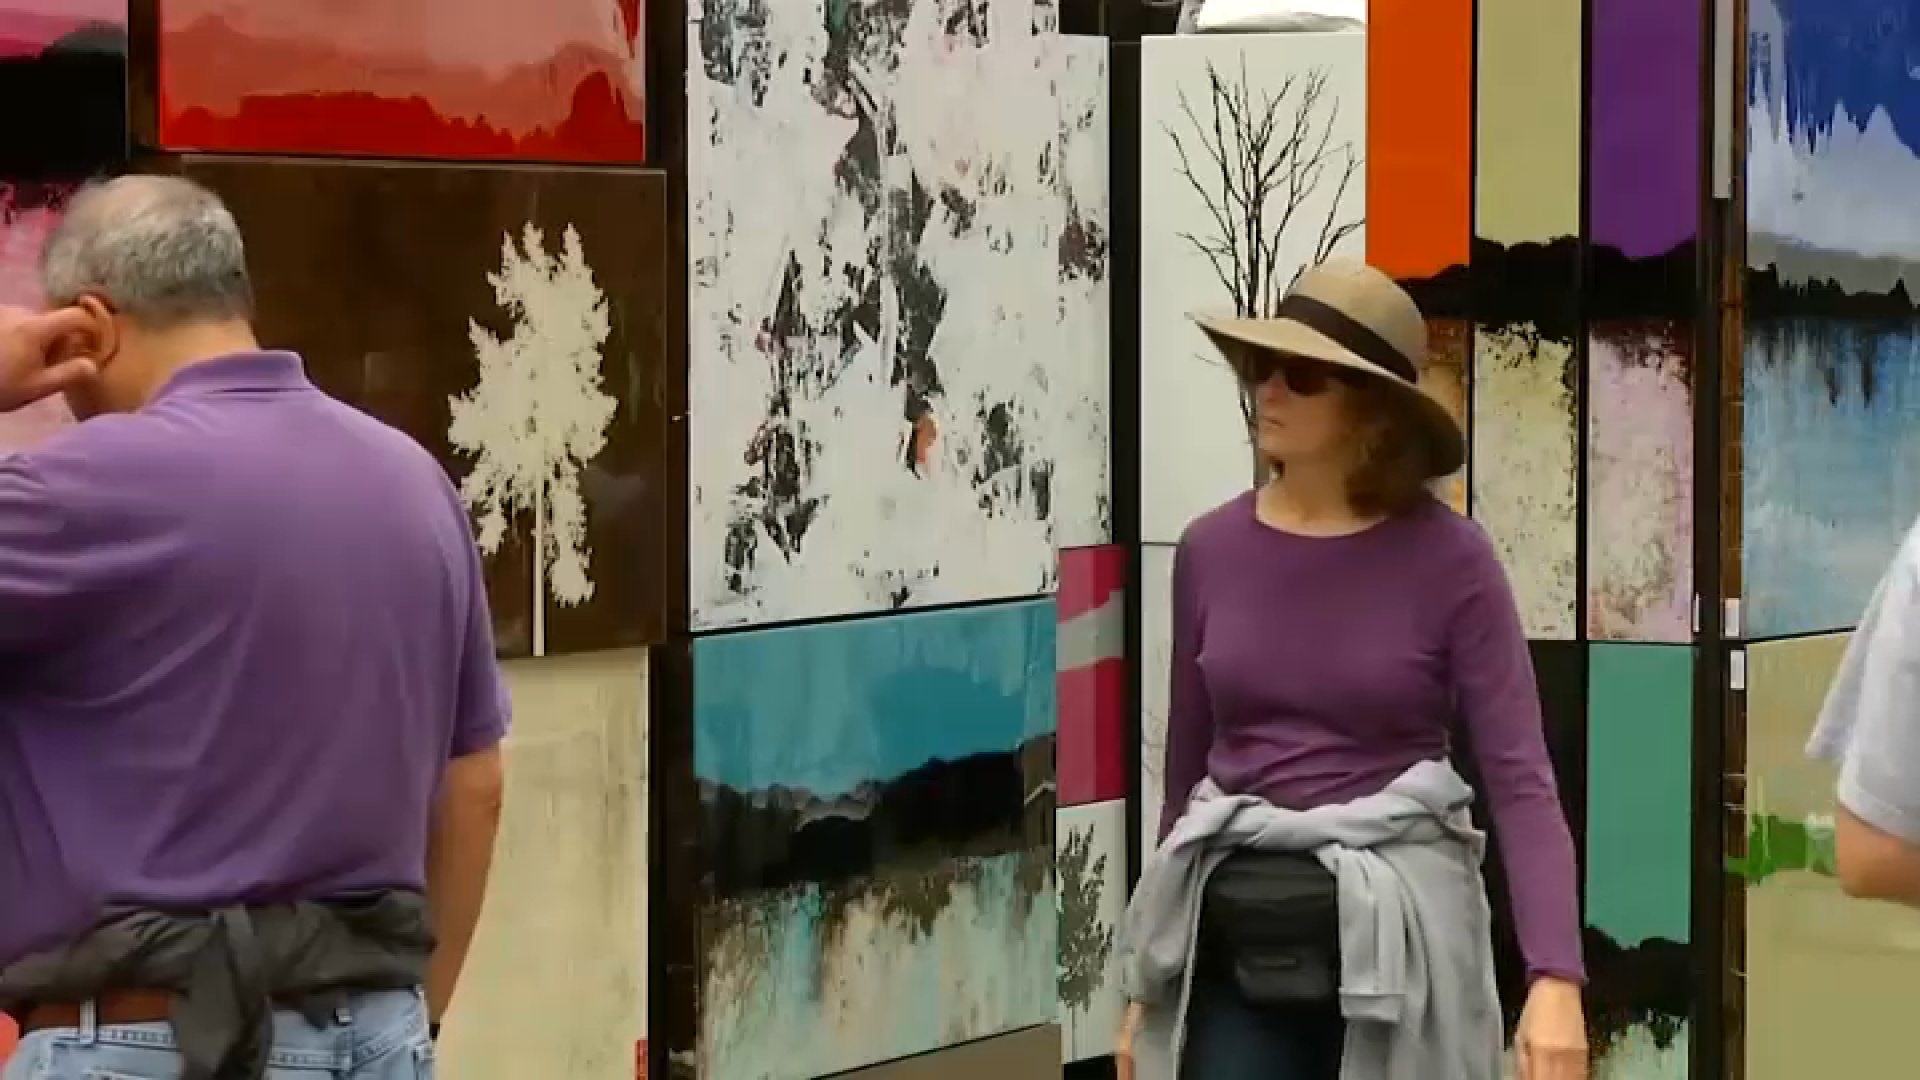 A woman takes a look at artwork at an Art Walk in Little Italy.